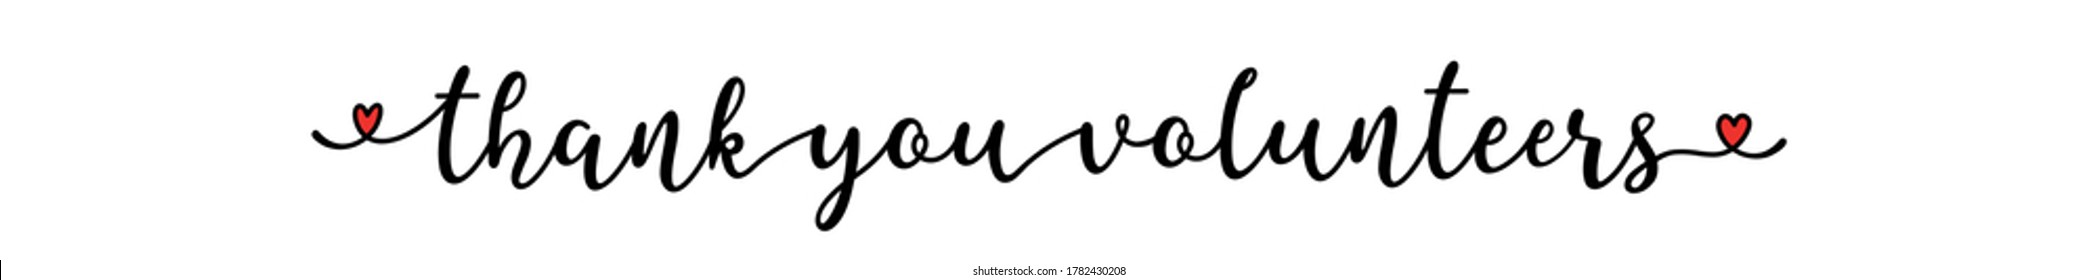 Hand sketched THANK YOU VOLUNTEERS quote as ad, web banner. Lettering for banner, header